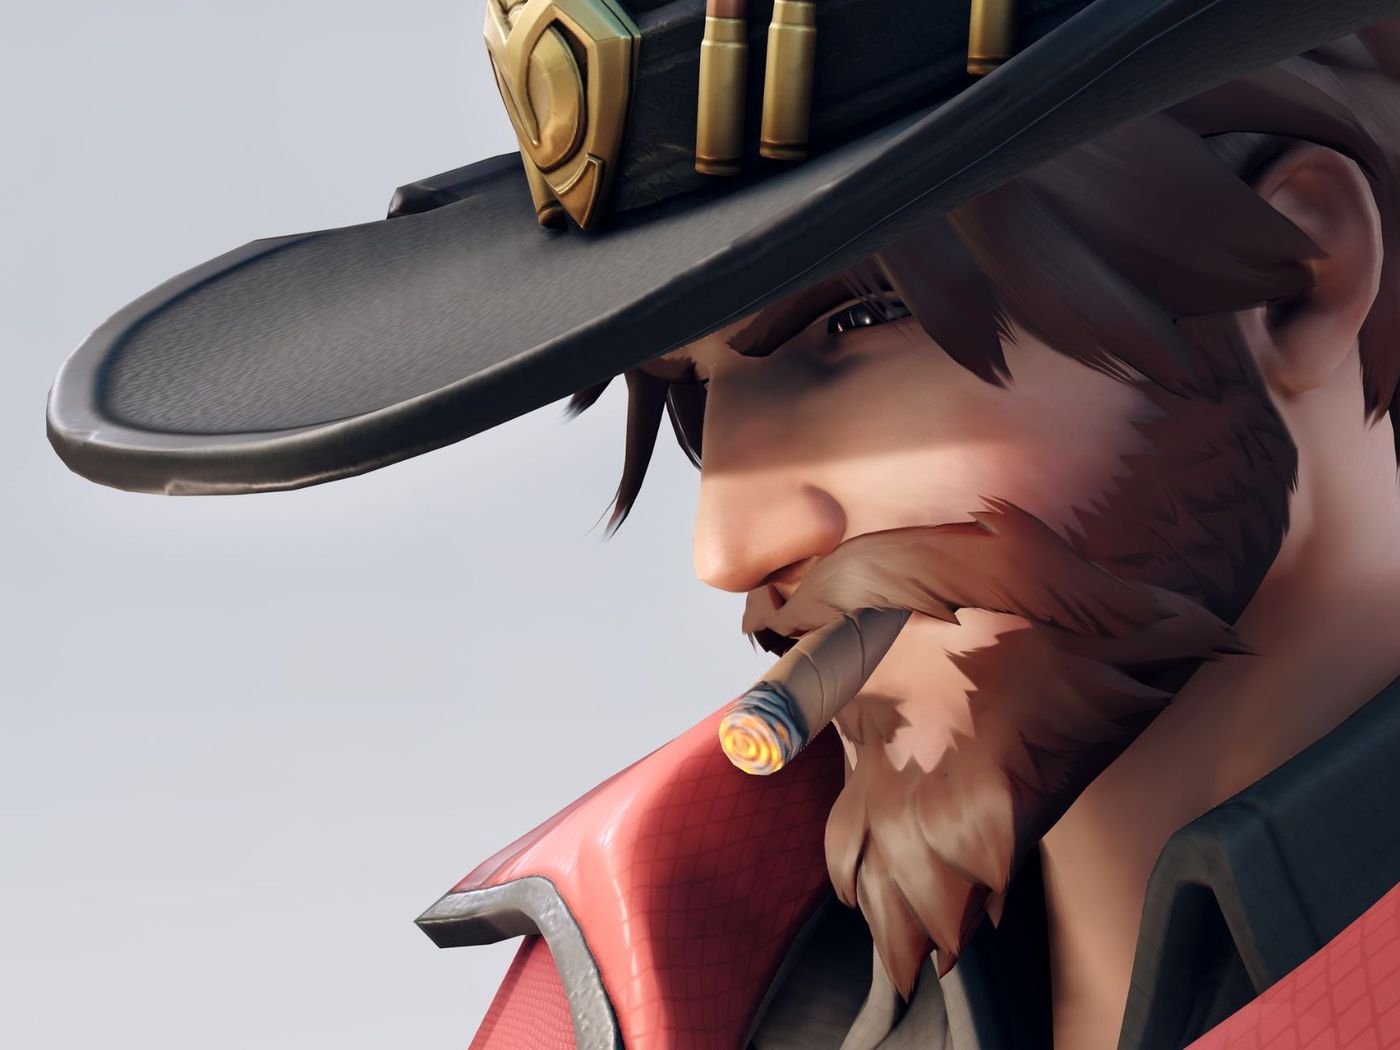 Overwatch's cowboy hero is now named Cole Cassidy